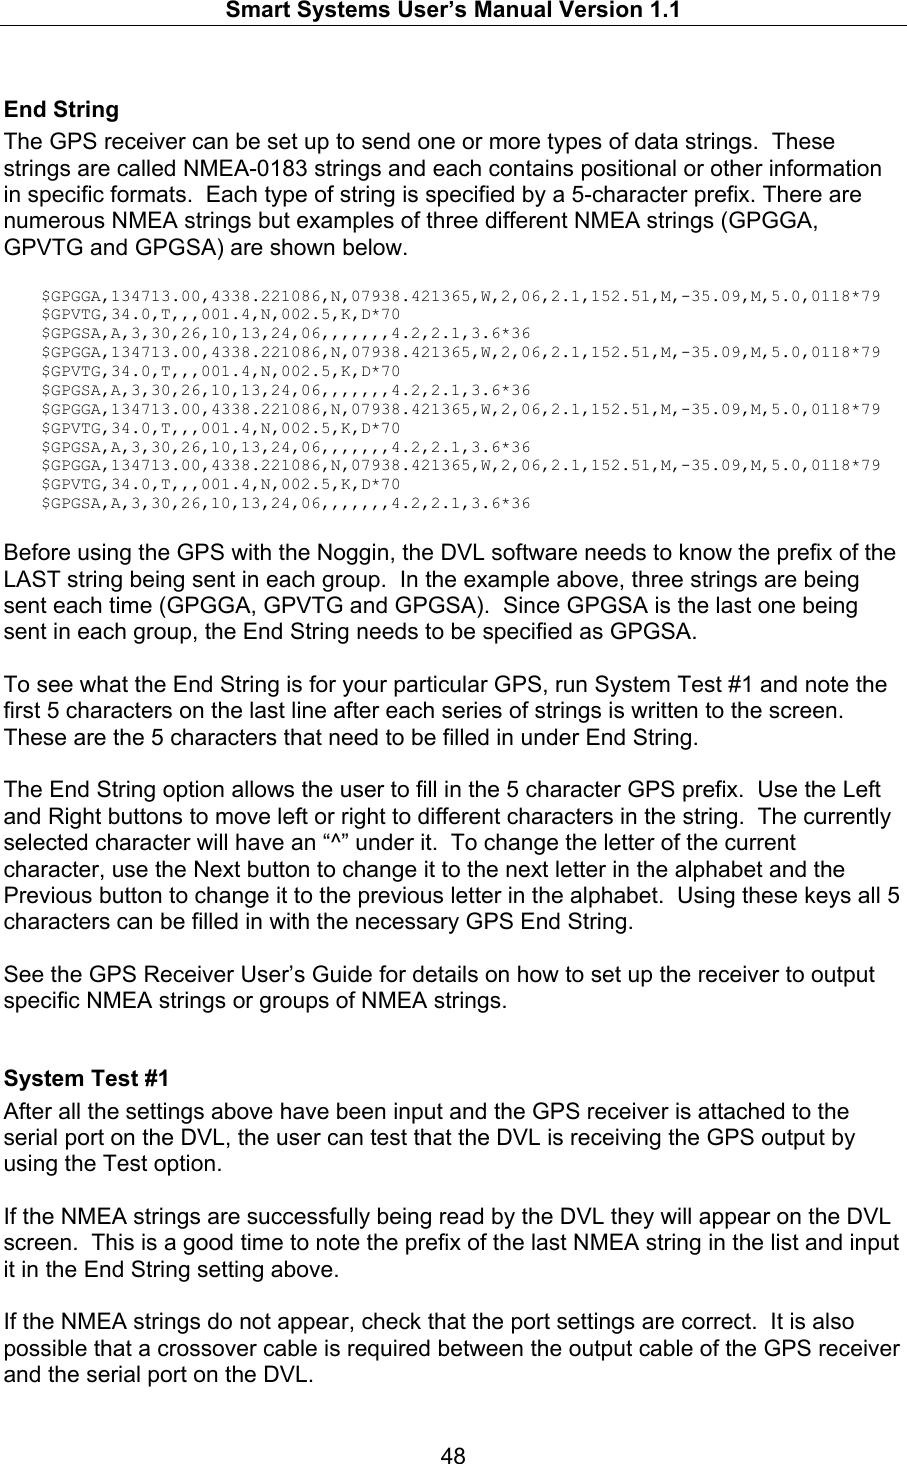   Smart Systems User’s Manual Version 1.1  48  End String The GPS receiver can be set up to send one or more types of data strings.  These strings are called NMEA-0183 strings and each contains positional or other information in specific formats.  Each type of string is specified by a 5-character prefix. There are numerous NMEA strings but examples of three different NMEA strings (GPGGA, GPVTG and GPGSA) are shown below.    $GPGGA,134713.00,4338.221086,N,07938.421365,W,2,06,2.1,152.51,M,-35.09,M,5.0,0118*79 $GPVTG,34.0,T,,,001.4,N,002.5,K,D*70 $GPGSA,A,3,30,26,10,13,24,06,,,,,,,4.2,2.1,3.6*36 $GPGGA,134713.00,4338.221086,N,07938.421365,W,2,06,2.1,152.51,M,-35.09,M,5.0,0118*79 $GPVTG,34.0,T,,,001.4,N,002.5,K,D*70 $GPGSA,A,3,30,26,10,13,24,06,,,,,,,4.2,2.1,3.6*36 $GPGGA,134713.00,4338.221086,N,07938.421365,W,2,06,2.1,152.51,M,-35.09,M,5.0,0118*79 $GPVTG,34.0,T,,,001.4,N,002.5,K,D*70 $GPGSA,A,3,30,26,10,13,24,06,,,,,,,4.2,2.1,3.6*36 $GPGGA,134713.00,4338.221086,N,07938.421365,W,2,06,2.1,152.51,M,-35.09,M,5.0,0118*79 $GPVTG,34.0,T,,,001.4,N,002.5,K,D*70 $GPGSA,A,3,30,26,10,13,24,06,,,,,,,4.2,2.1,3.6*36  Before using the GPS with the Noggin, the DVL software needs to know the prefix of the LAST string being sent in each group.  In the example above, three strings are being sent each time (GPGGA, GPVTG and GPGSA).  Since GPGSA is the last one being sent in each group, the End String needs to be specified as GPGSA.  To see what the End String is for your particular GPS, run System Test #1 and note the first 5 characters on the last line after each series of strings is written to the screen.  These are the 5 characters that need to be filled in under End String.  The End String option allows the user to fill in the 5 character GPS prefix.  Use the Left and Right buttons to move left or right to different characters in the string.  The currently selected character will have an “^” under it.  To change the letter of the current character, use the Next button to change it to the next letter in the alphabet and the Previous button to change it to the previous letter in the alphabet.  Using these keys all 5 characters can be filled in with the necessary GPS End String.  See the GPS Receiver User’s Guide for details on how to set up the receiver to output specific NMEA strings or groups of NMEA strings.    System Test #1 After all the settings above have been input and the GPS receiver is attached to the serial port on the DVL, the user can test that the DVL is receiving the GPS output by using the Test option.   If the NMEA strings are successfully being read by the DVL they will appear on the DVL screen.  This is a good time to note the prefix of the last NMEA string in the list and input it in the End String setting above.  If the NMEA strings do not appear, check that the port settings are correct.  It is also possible that a crossover cable is required between the output cable of the GPS receiver and the serial port on the DVL. 